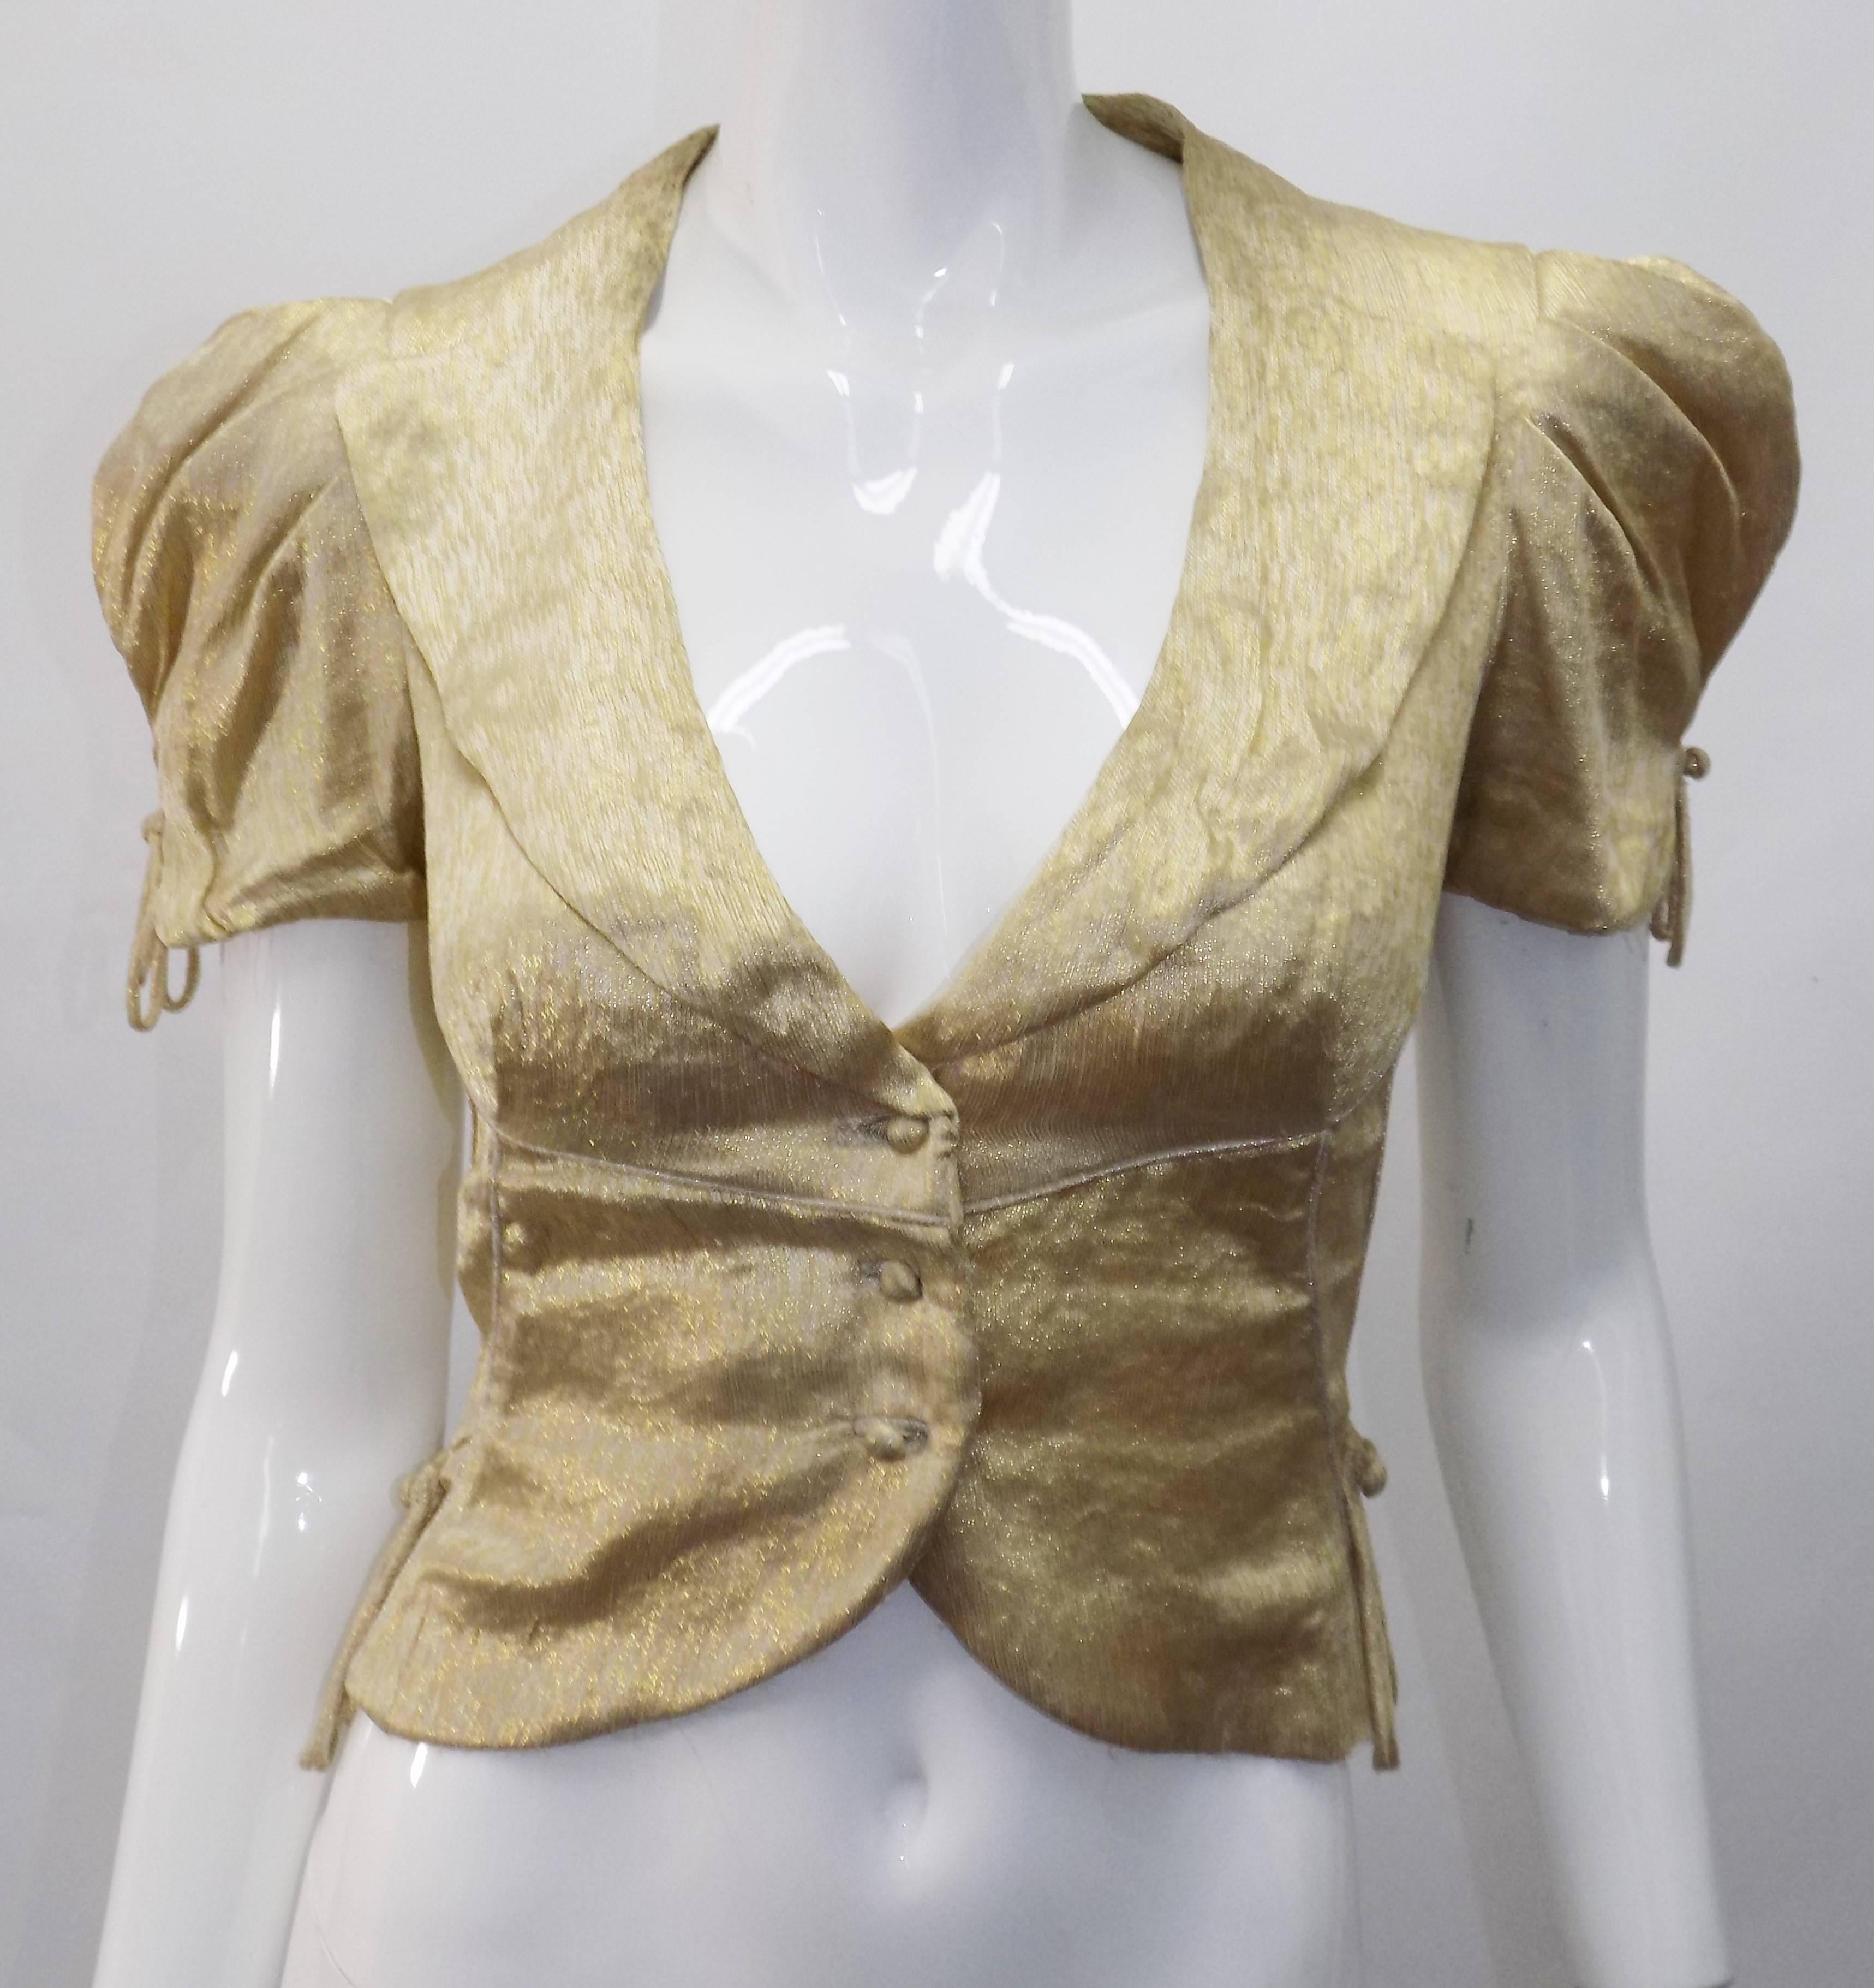 Fabulous  Louis Vuitton Gold Metallic Top. Wait line at the back is adorned with round ribbon fringe resembling military style. Short buffoon sleeves. Front covered buttons closure. Size 2. Great look paired with Jeans. 

Bust 34